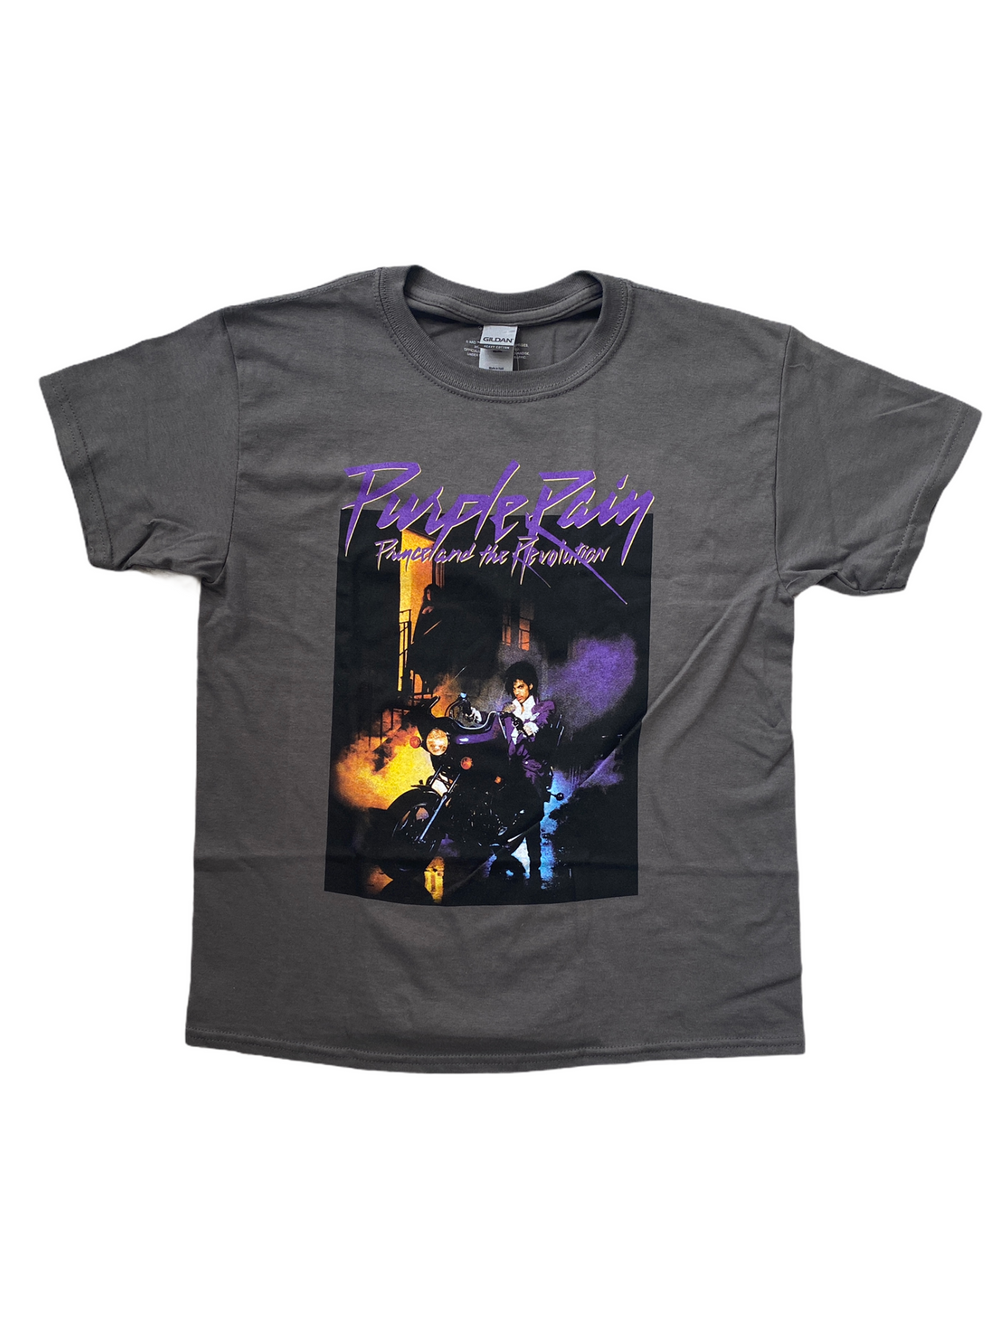 Prince – KIDS Official T Shirt Brand New Various Sizes Purple Rain Extended